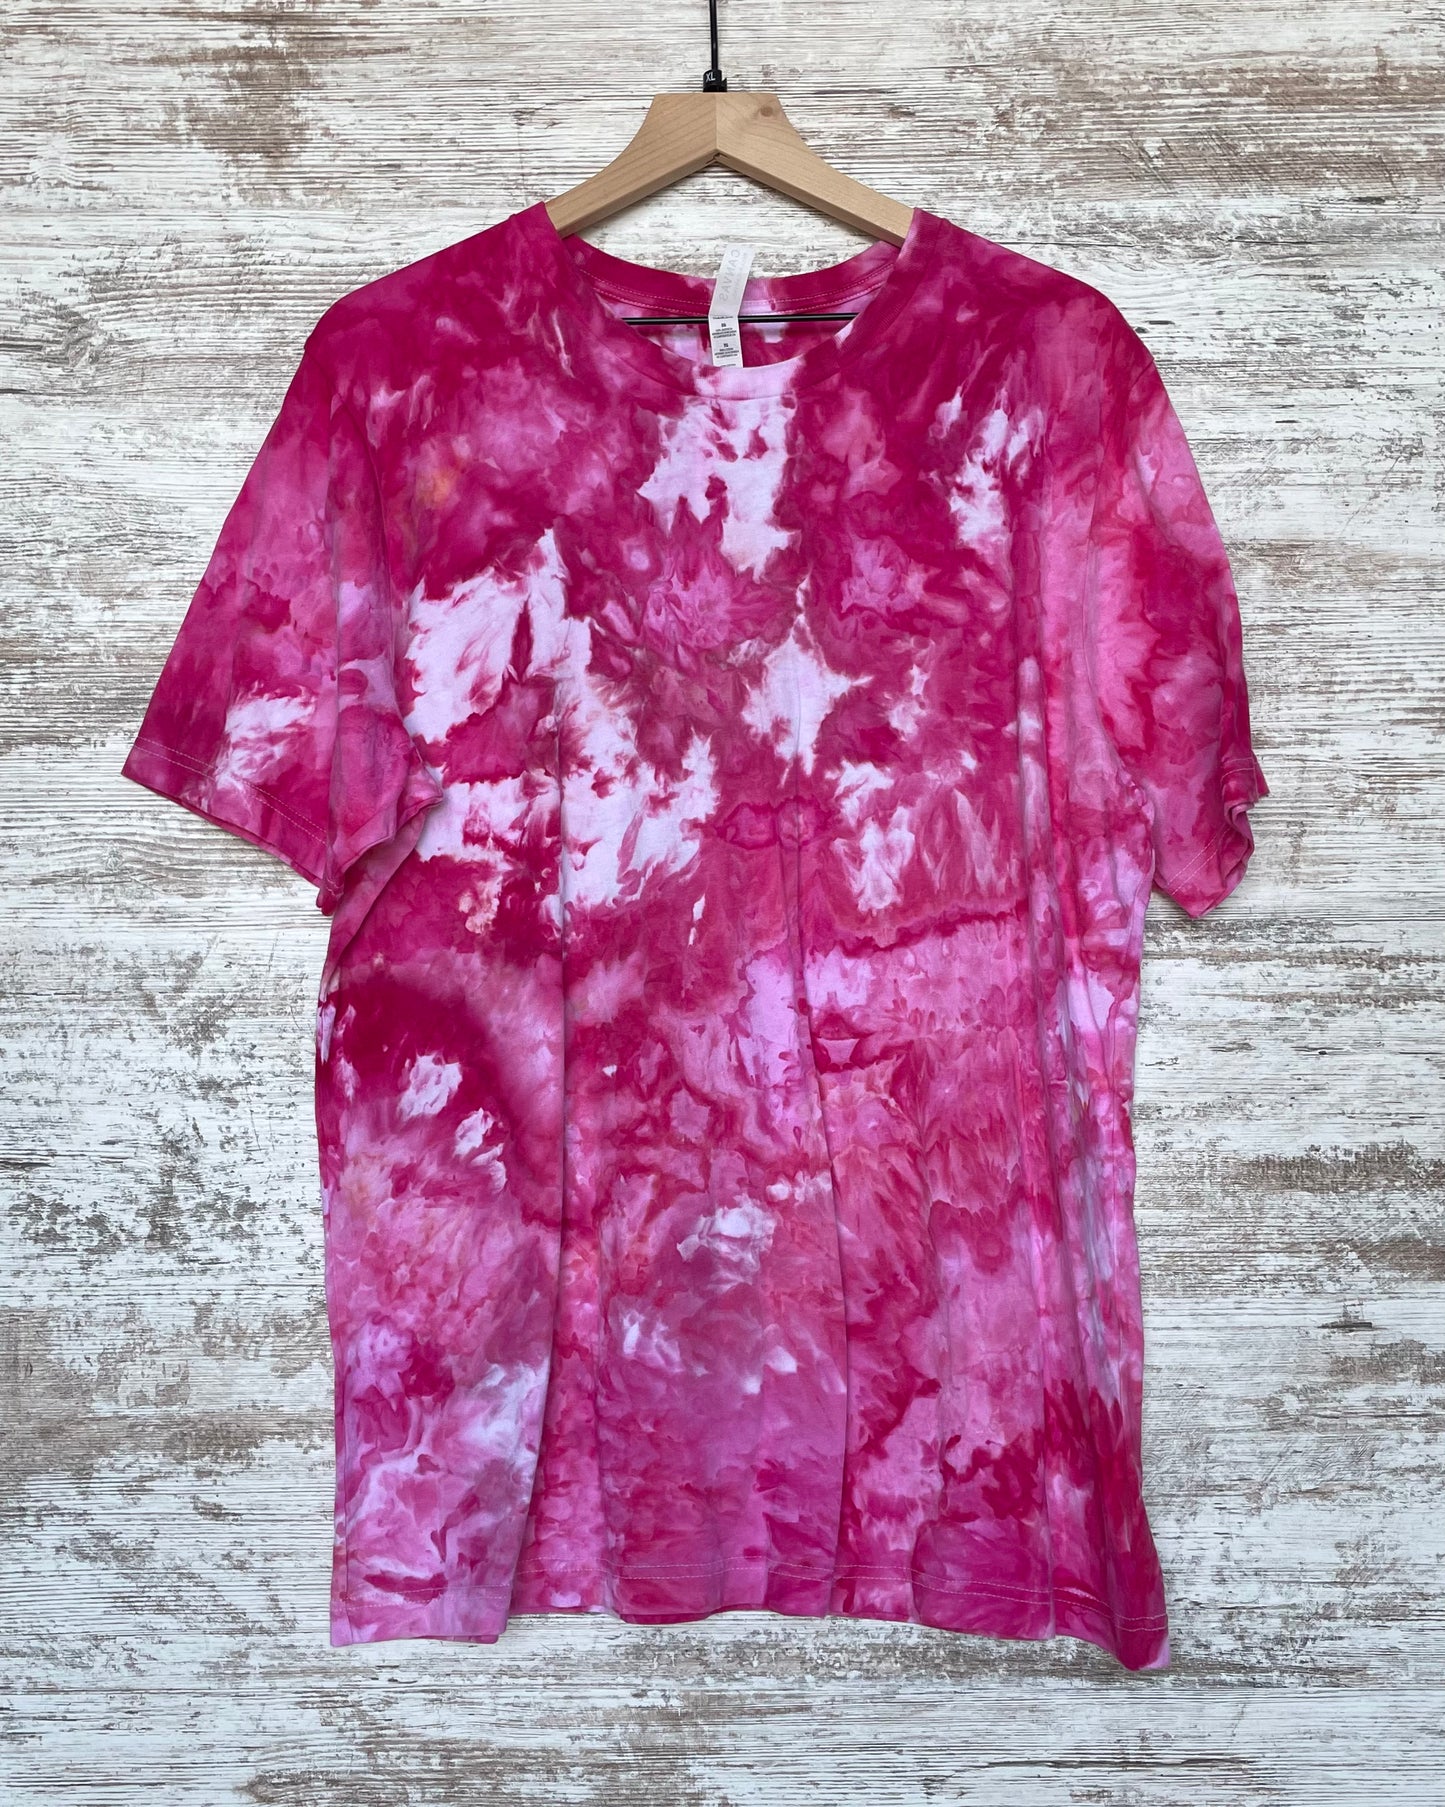 Blossom Pink Ice-Dyed Adult Unisex T-shirt